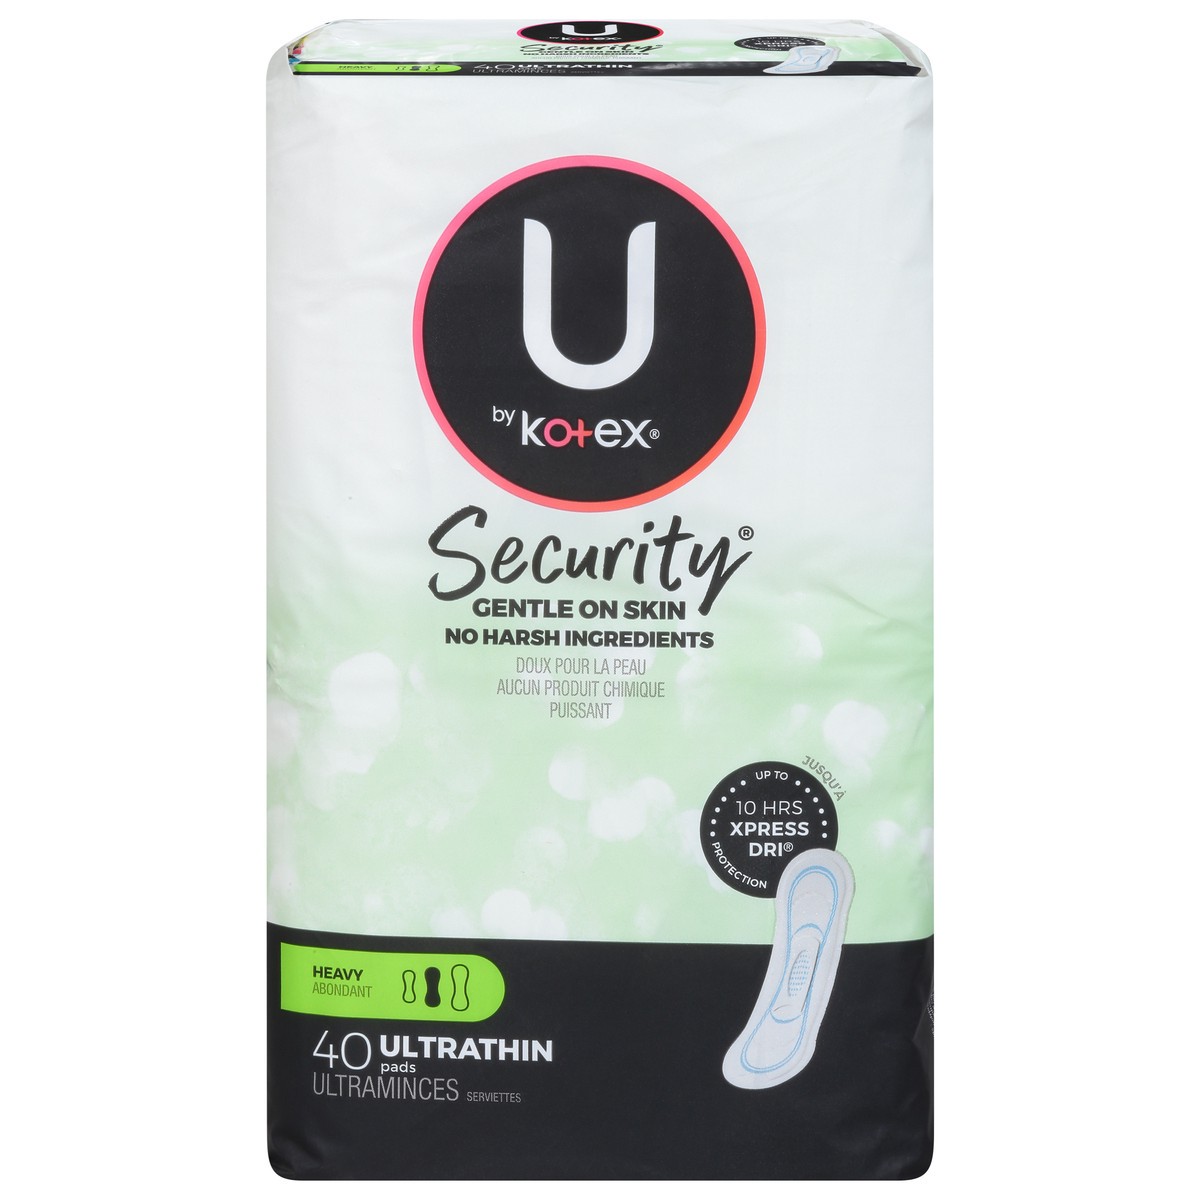 slide 15 of 16, U by Kotex Security Heavy Ultra Thin Pads 40 ea, 40 ct